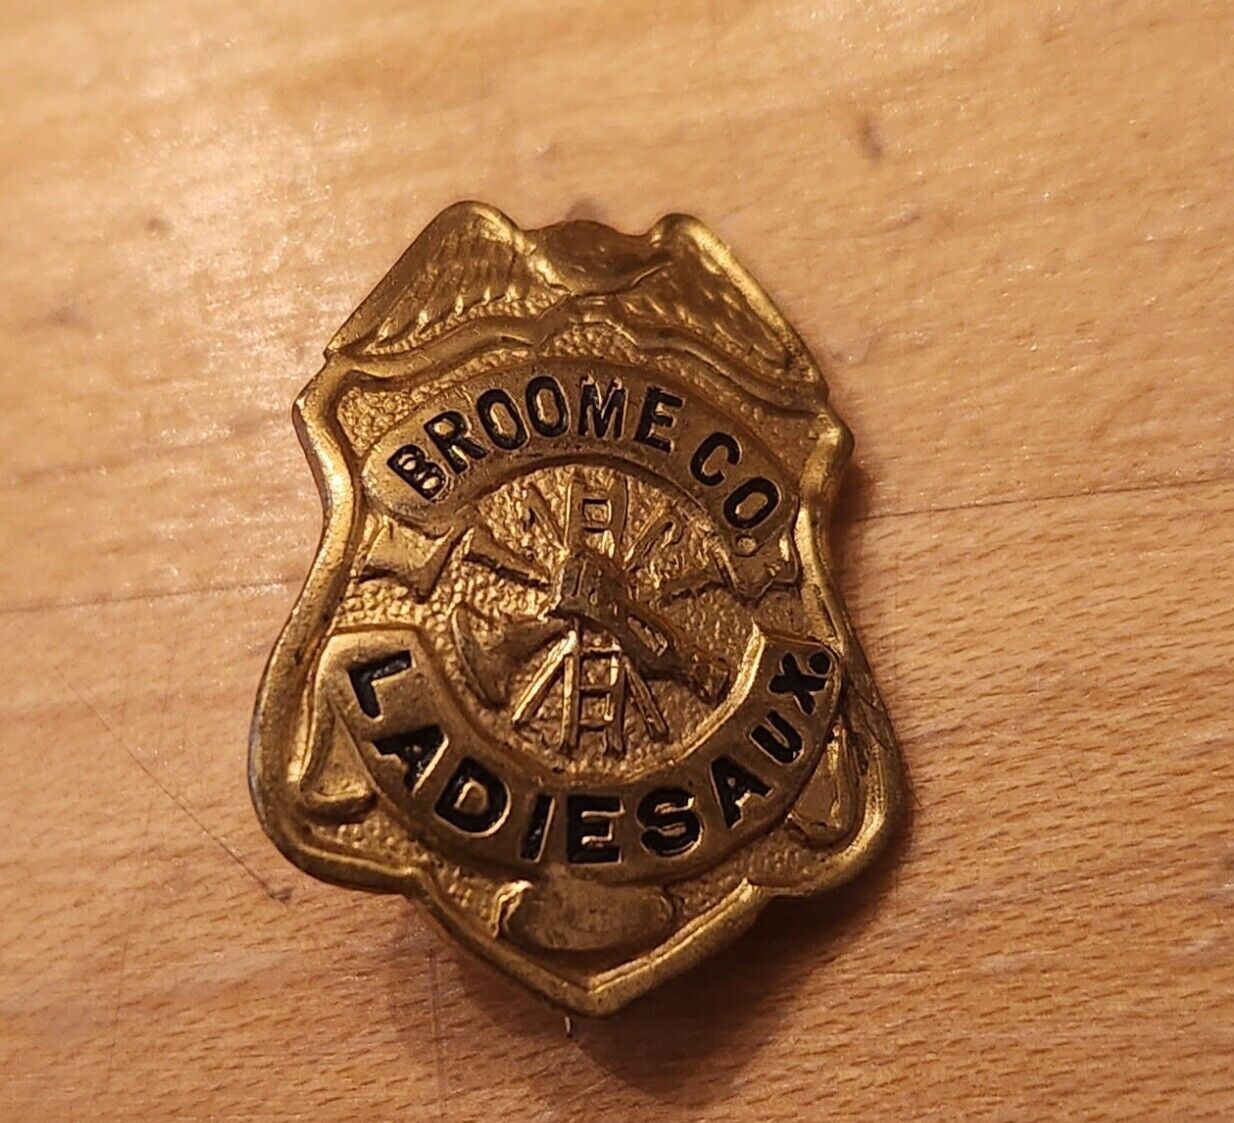 OLD SMALL BROOME COUNTY NY LADIES AUXILIARY FIRE BADGE FIREFIGHTER NEW YORK